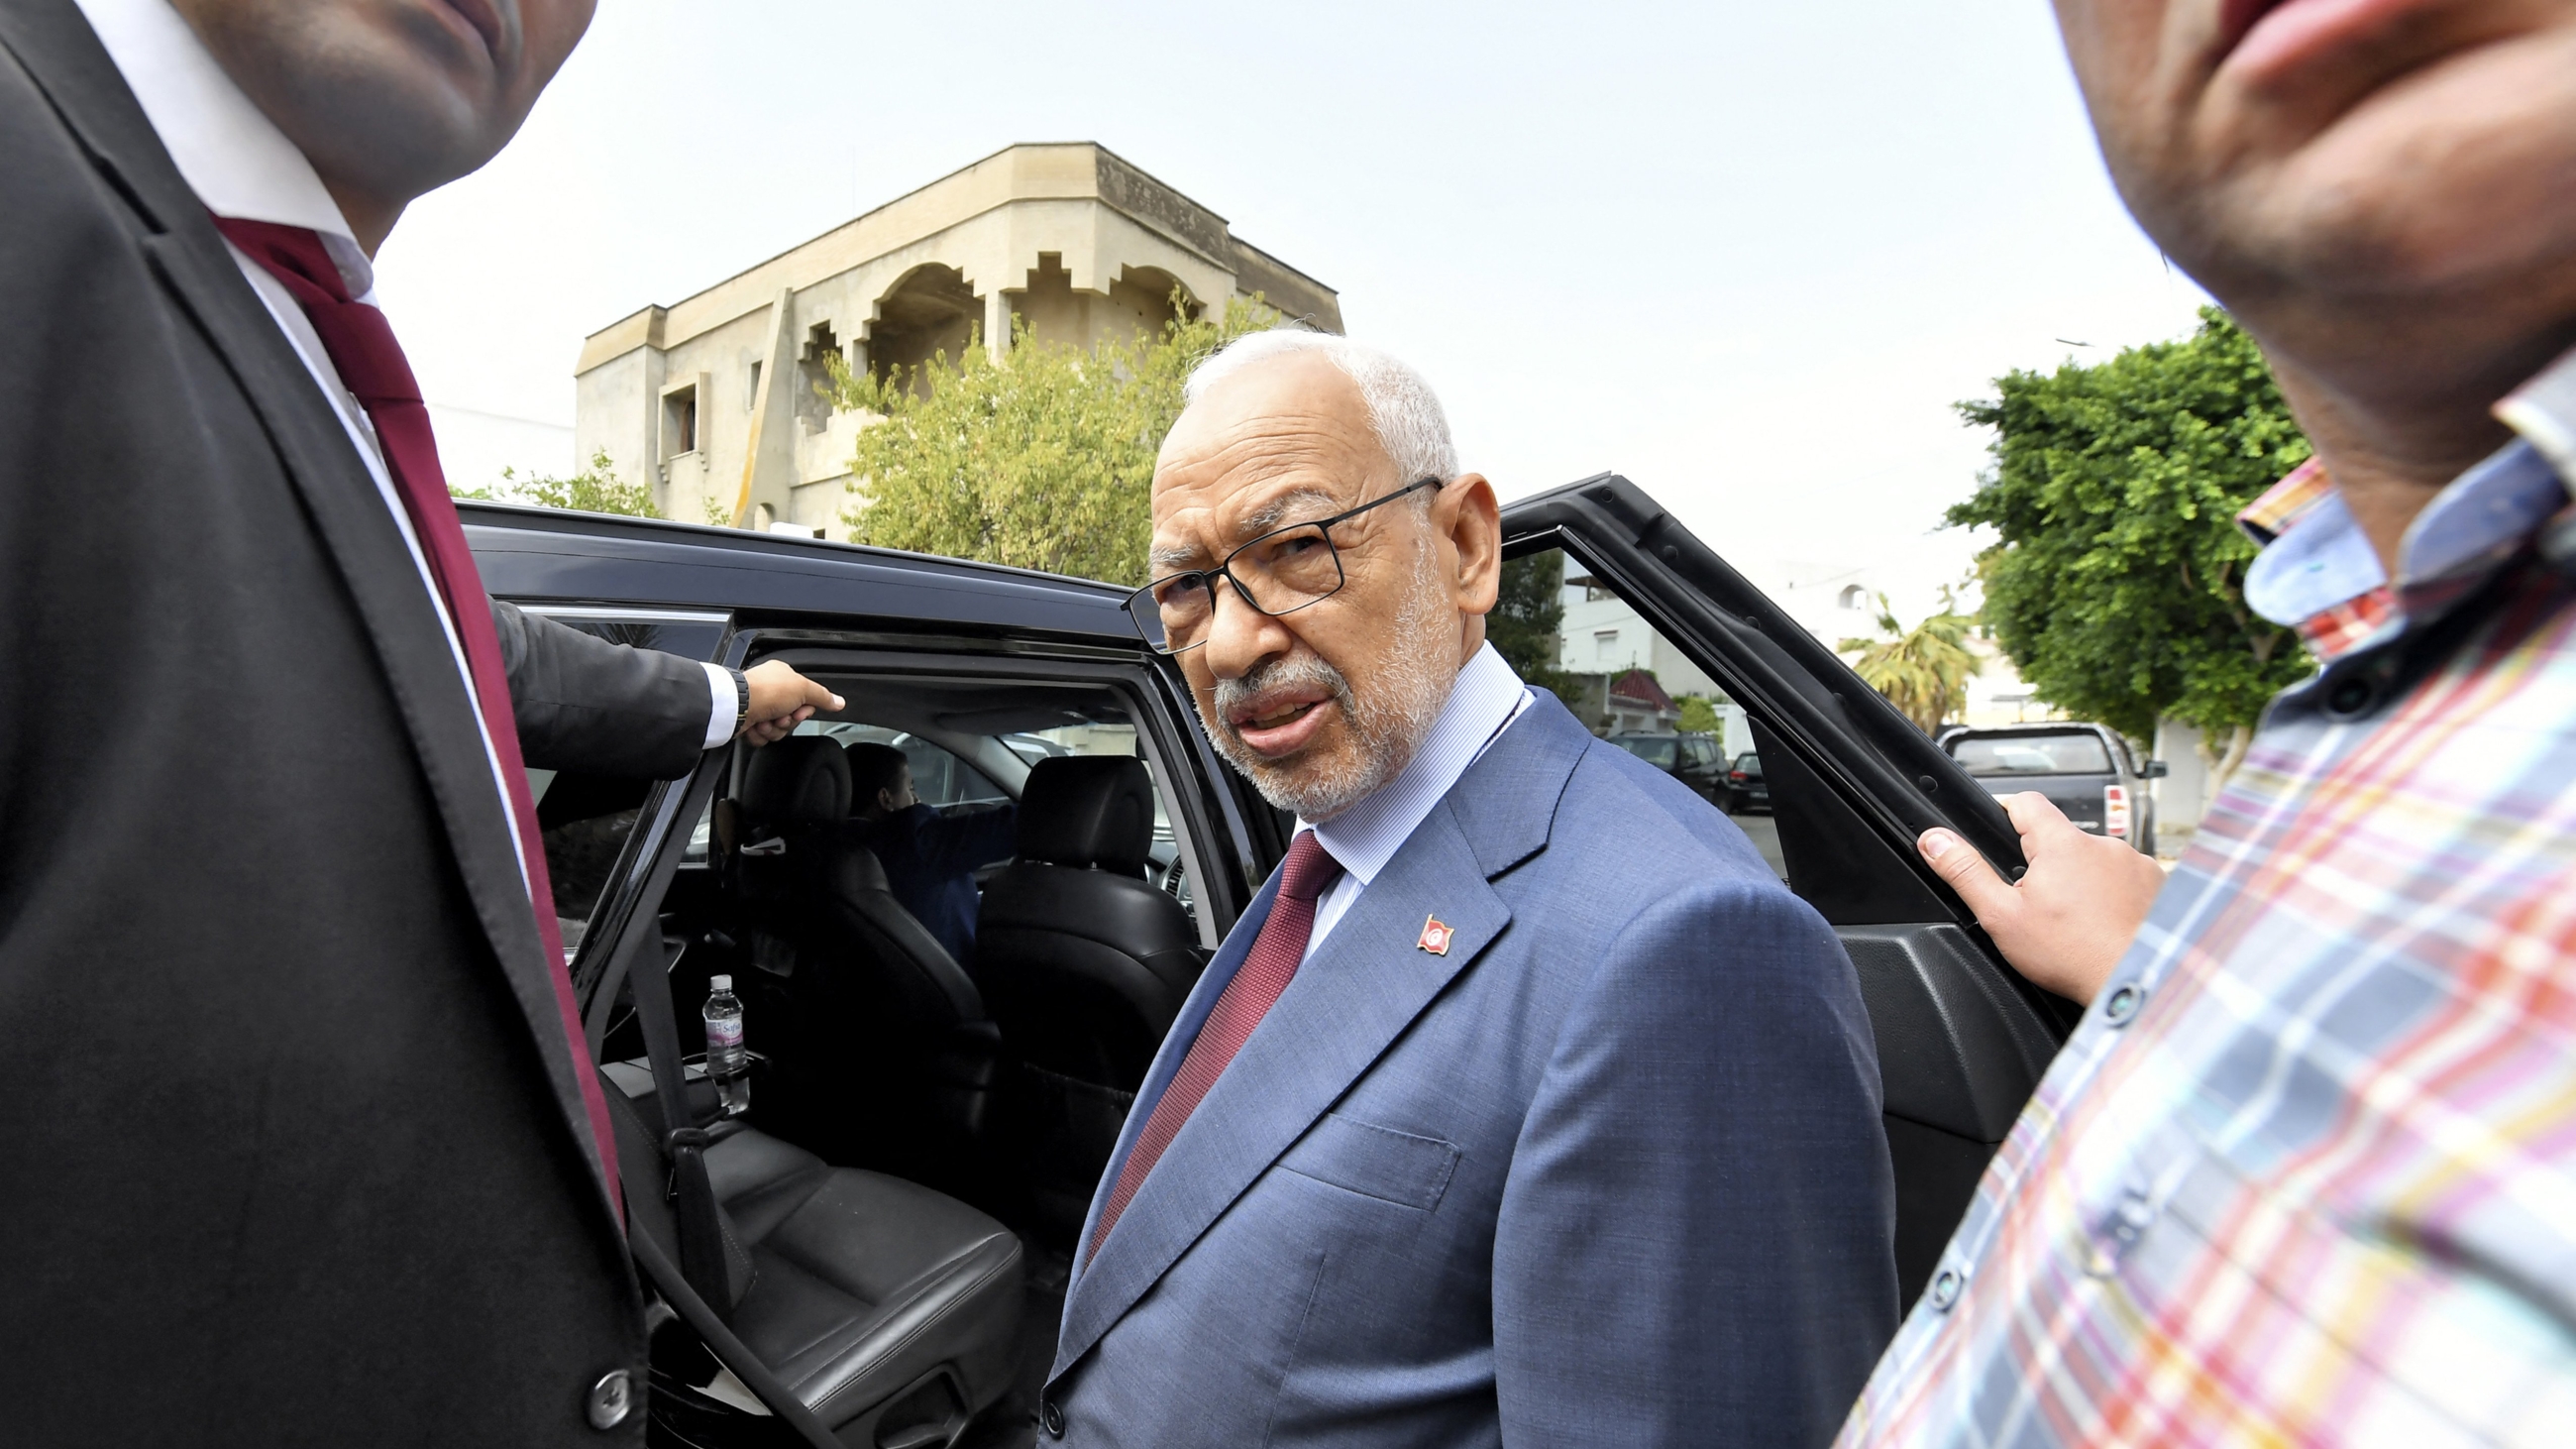 Rached Ghannouchi, leader of the Tunisian Ennahdha party, departs his house to go to the offices of Tunisia's counter-terrorism prosecutor in the capital Tunis on 20 September 2022 (AFP)